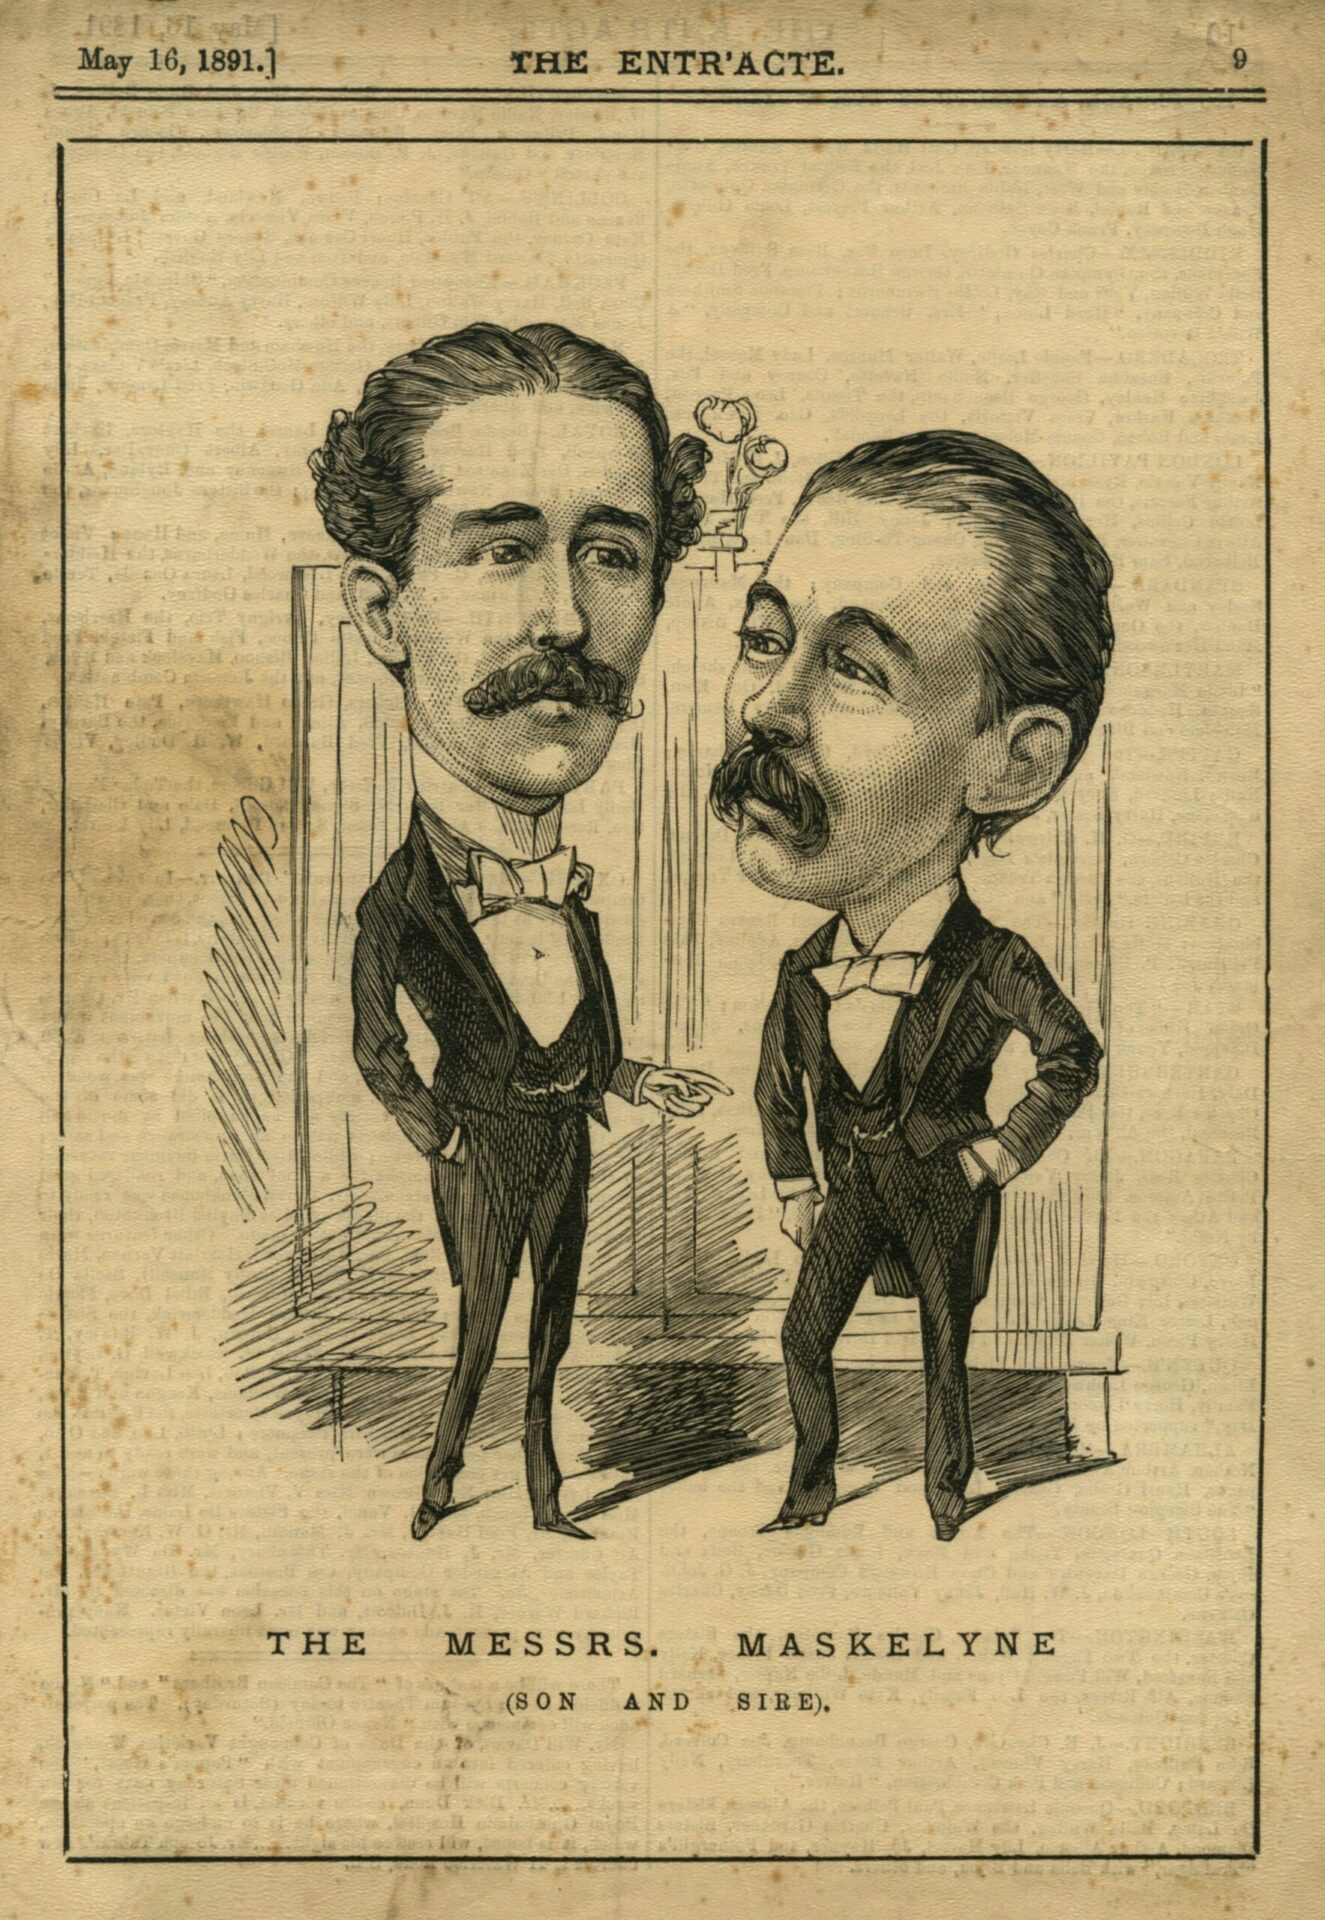 Print of the Messrs Maskelyne in ‘The Entr’acte’, 1891